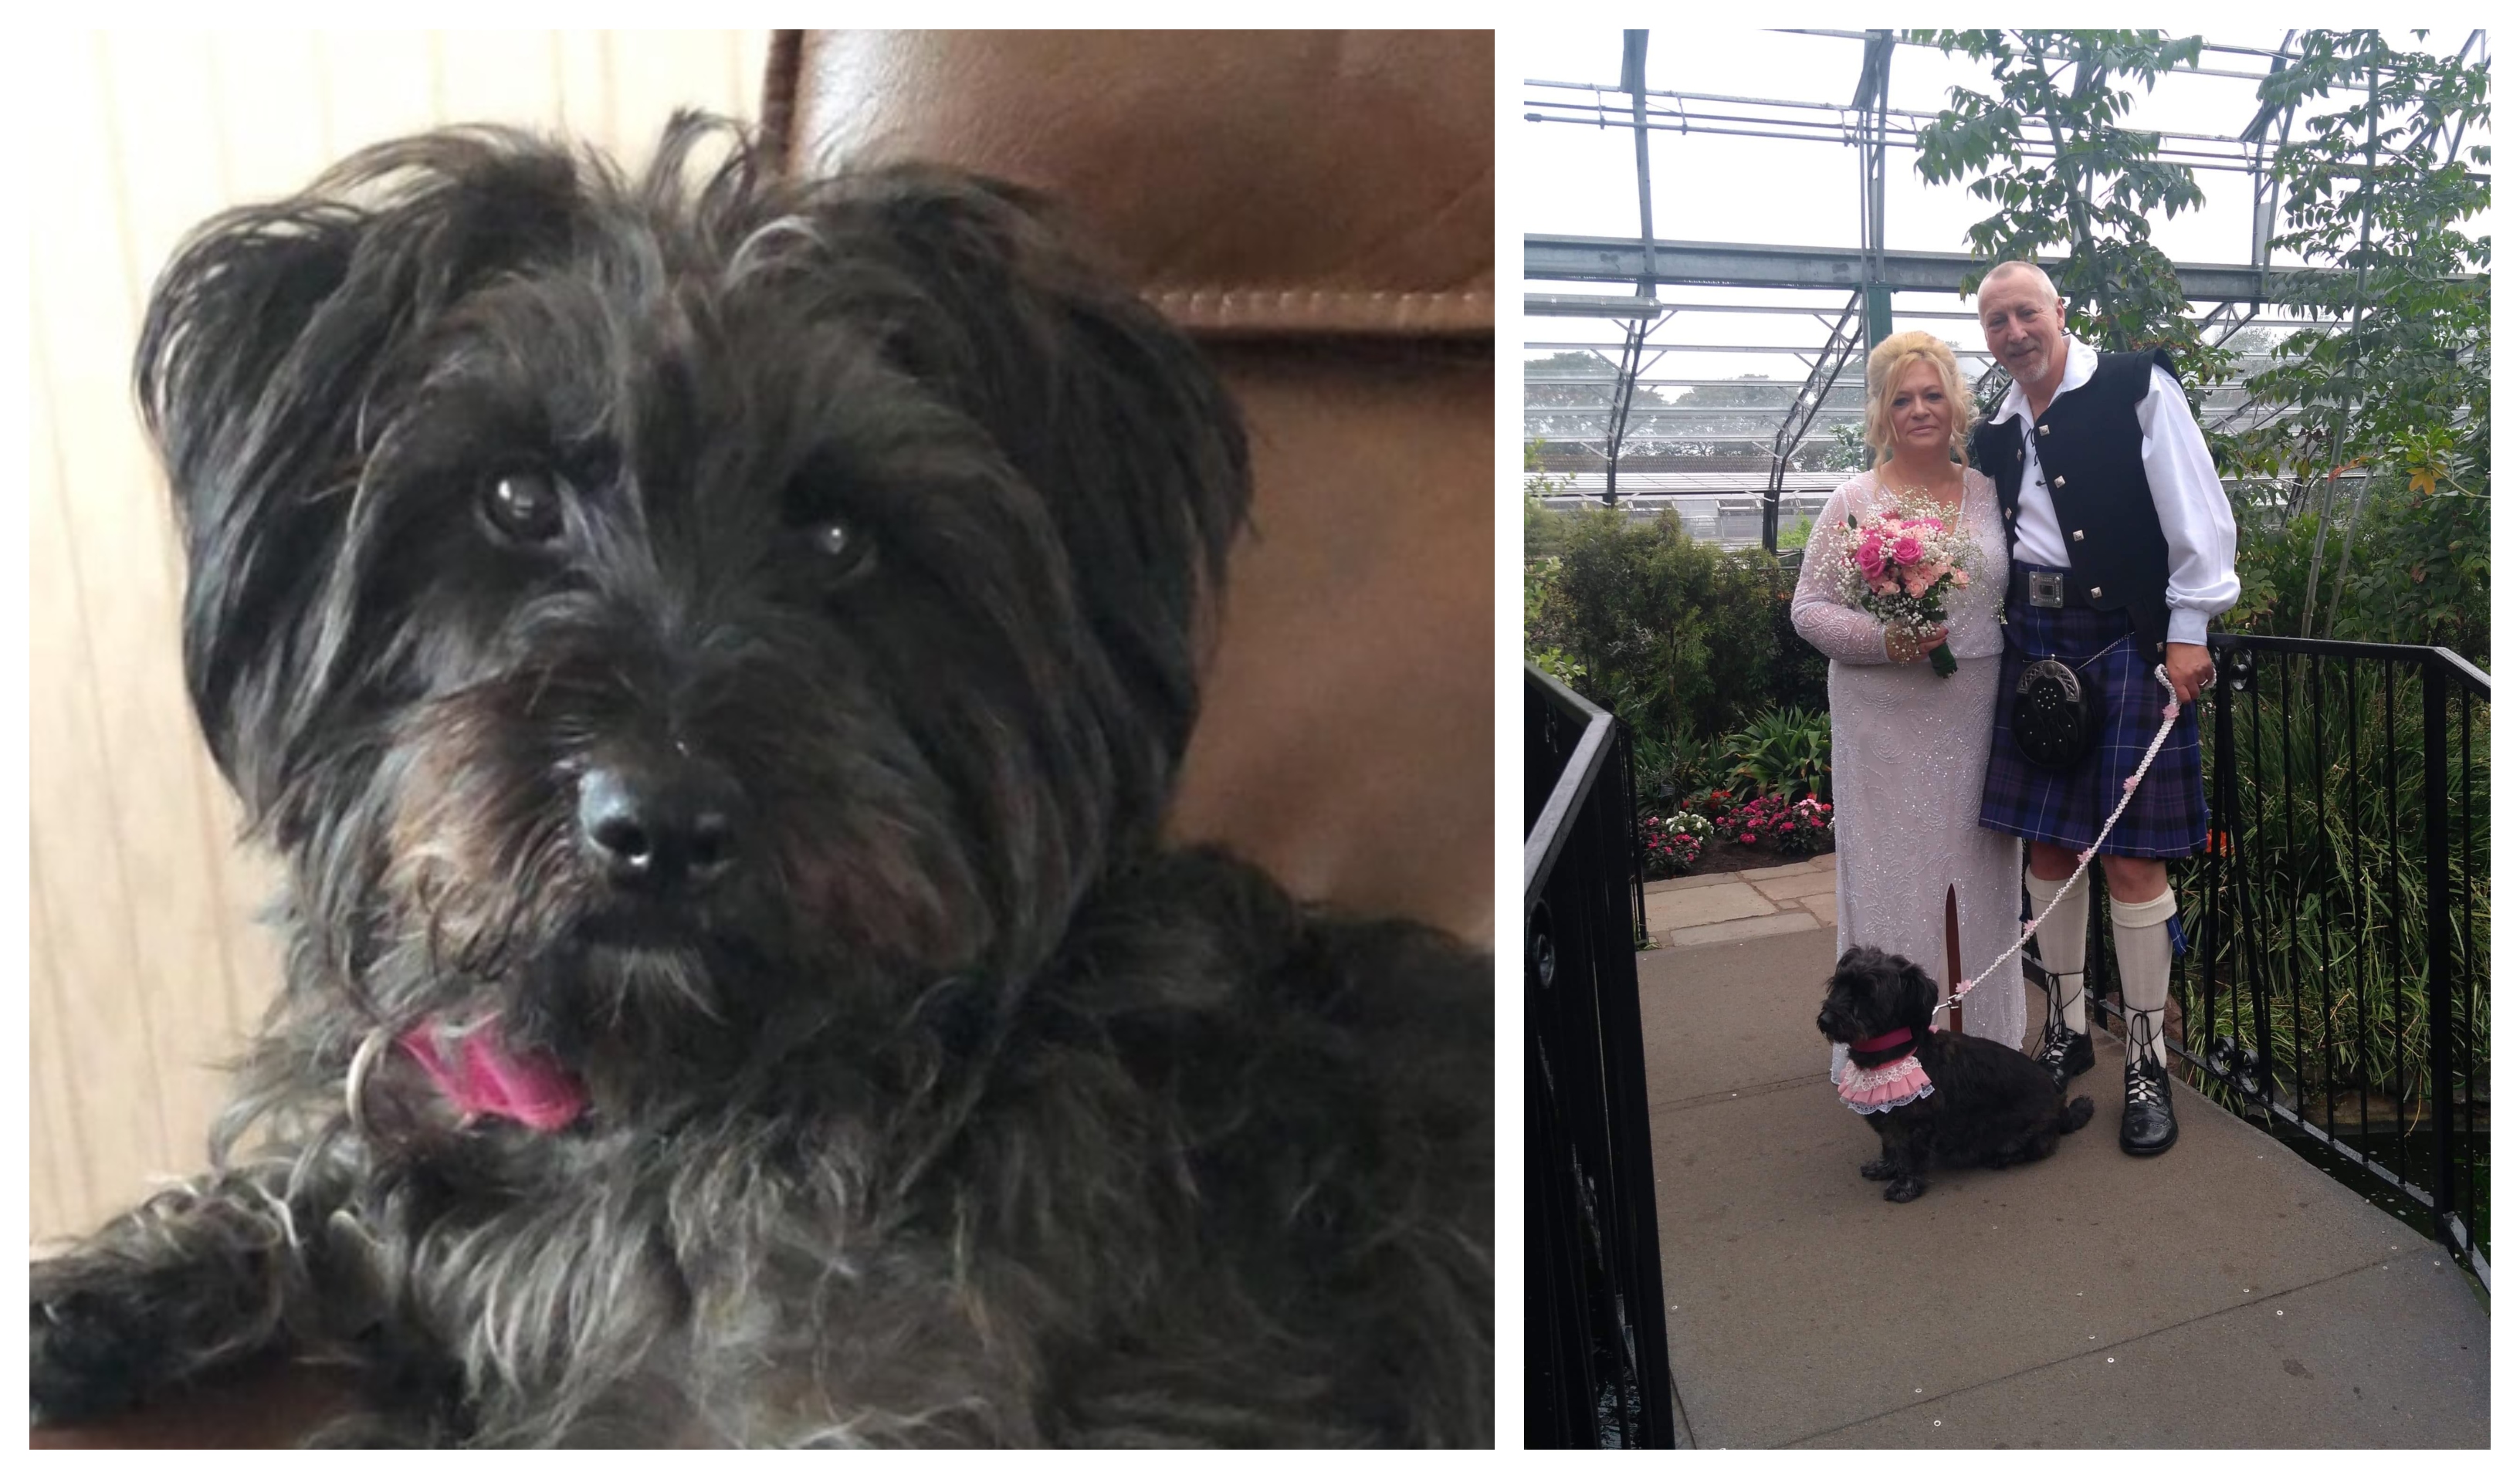 Scottie-Lhasa Apso cross Coco led Carol Gray down the aisle as she married husband Ally last month.